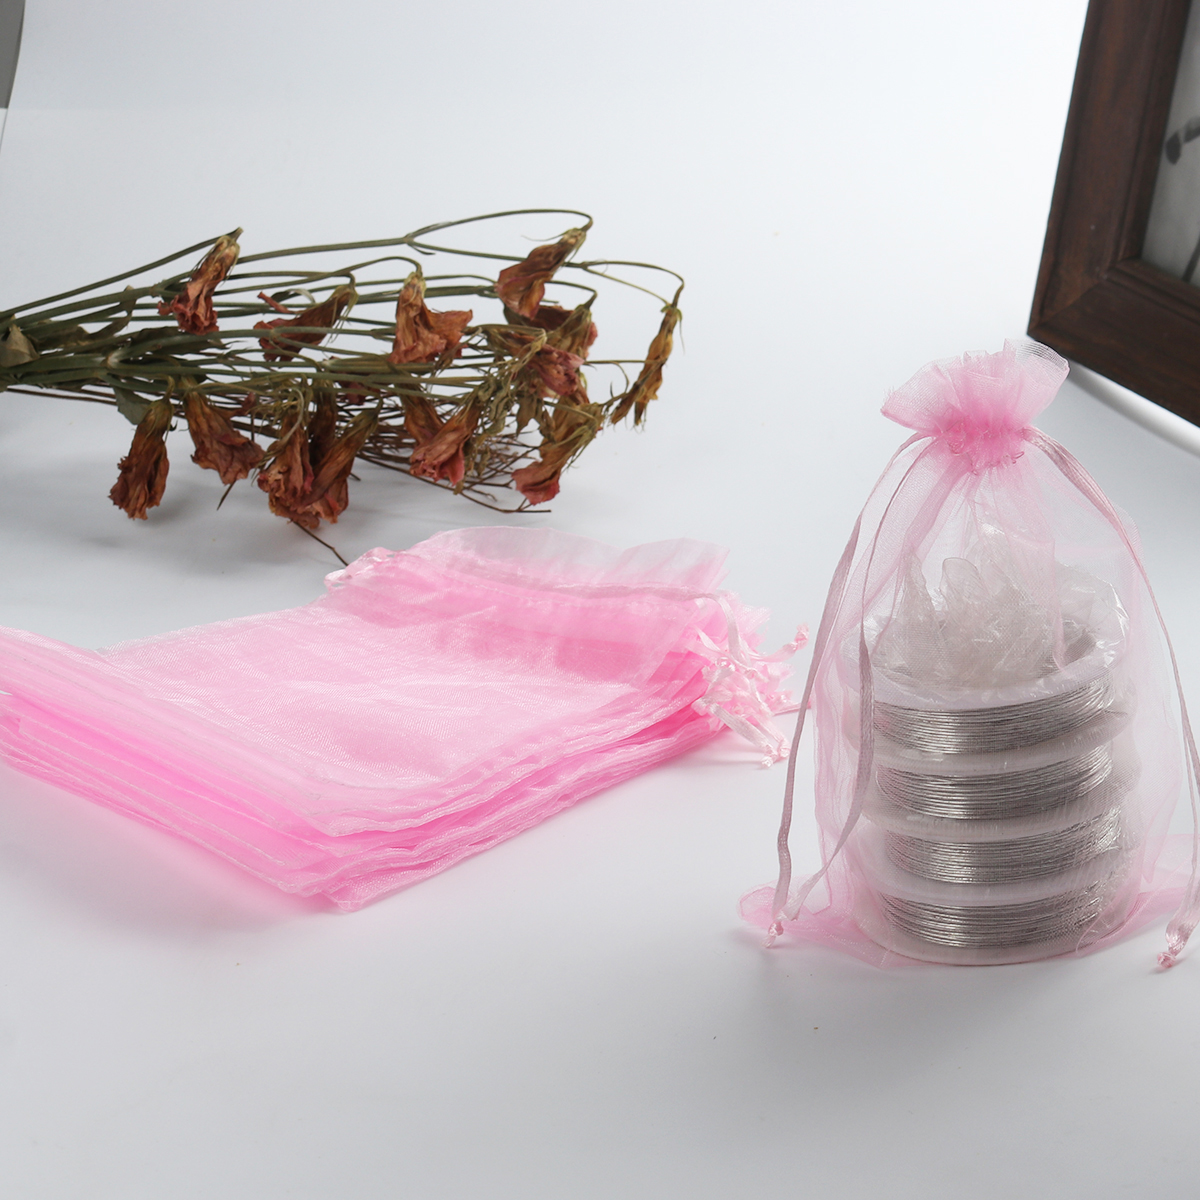 Picture of Wedding Gift Organza Jewelry Bags Drawstring Rectangle Pink (Usable Space: 13.5x10.5cm) 16cm x 11cm, 20 PCs